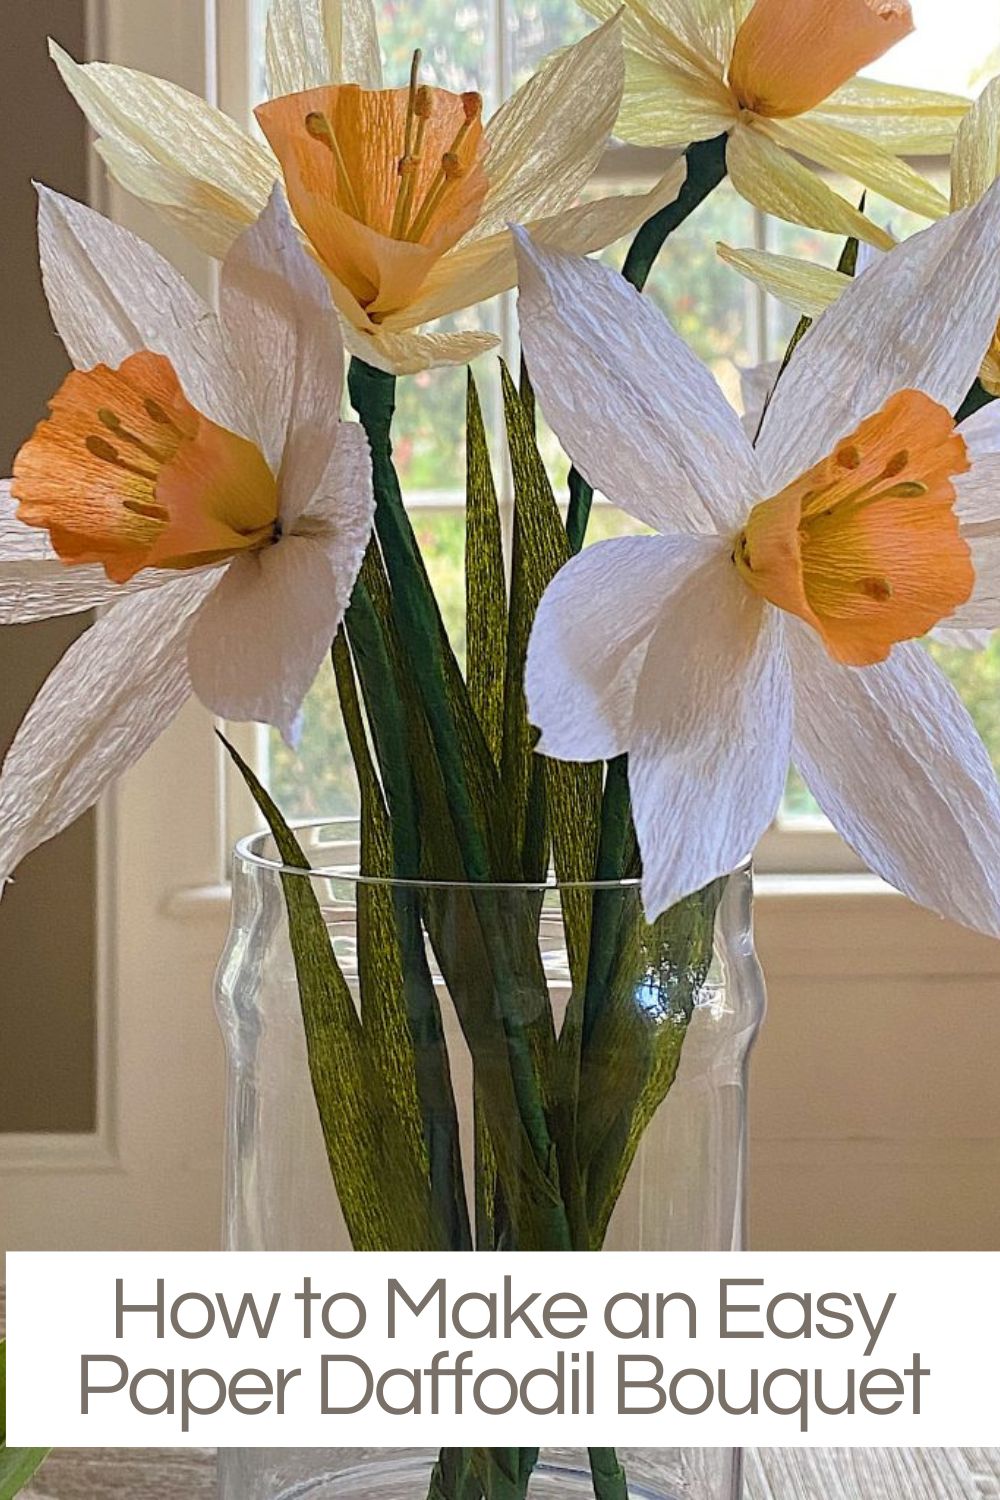 How to make an easy paper daffodil bouquet